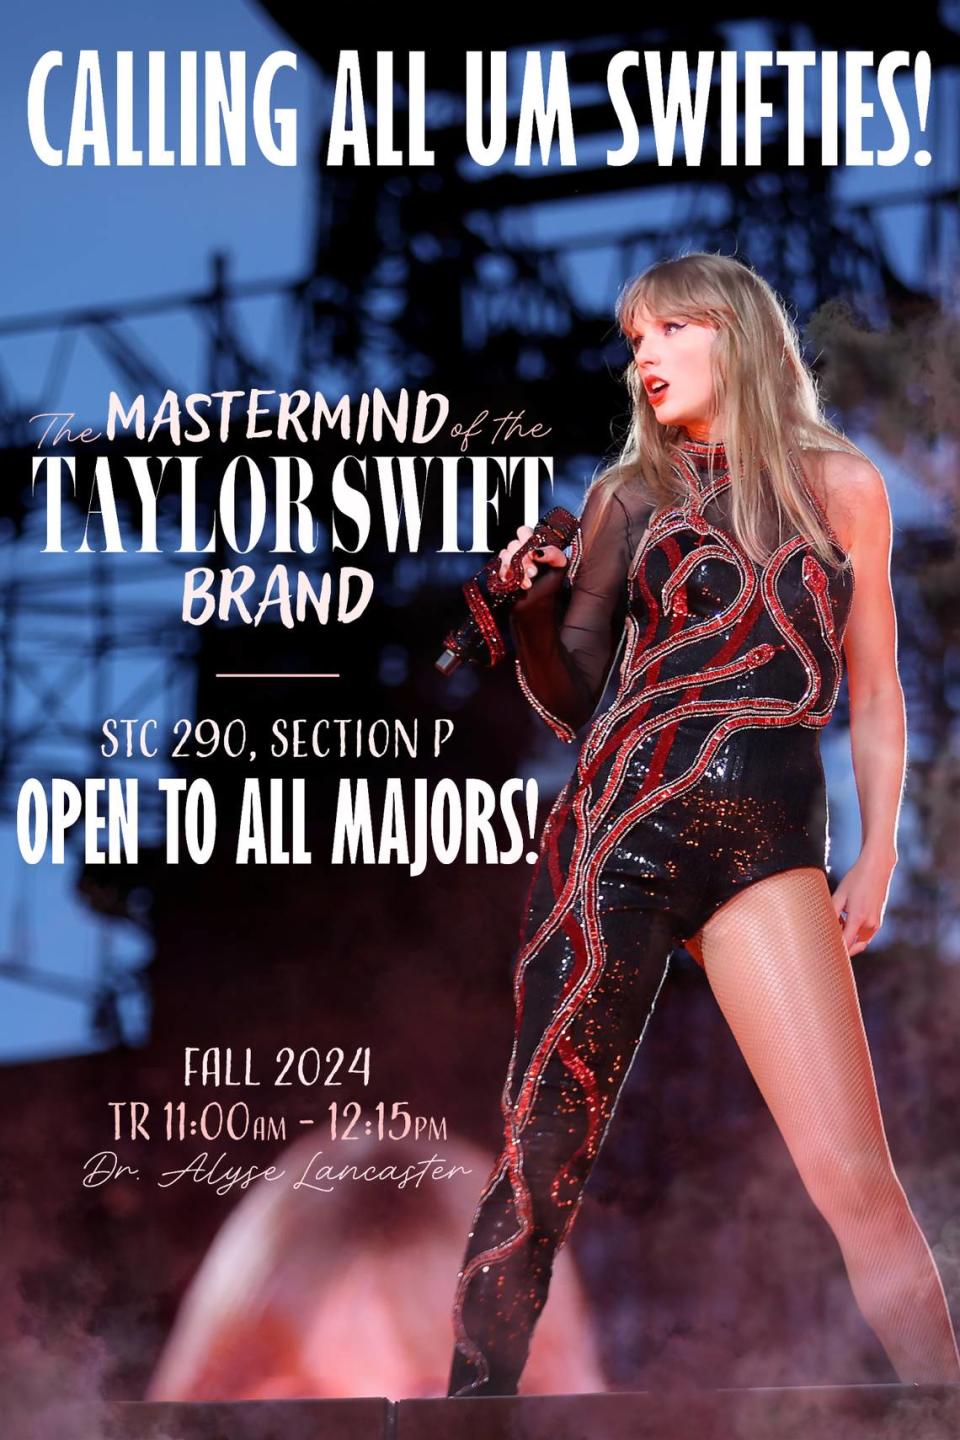 Poster designed by Sydney Lancaster at the University of Miami’s School of Communications touts the coming Taylor Swift course the department has added for the fall 2024 semester. Mastermind Taylor Swift brand will teach strategic communication through the prism of the pop star’s career.